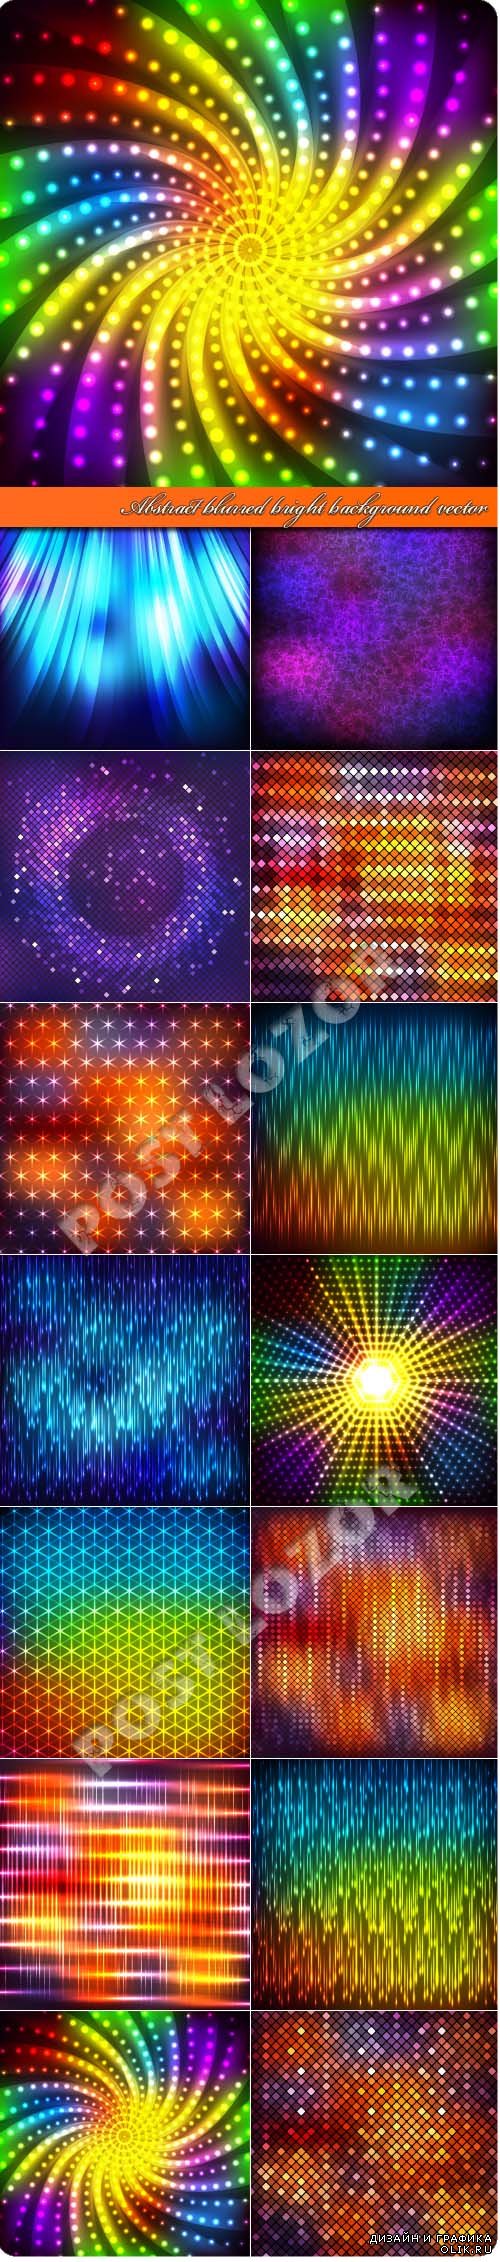 Abstract blurred bright background vector